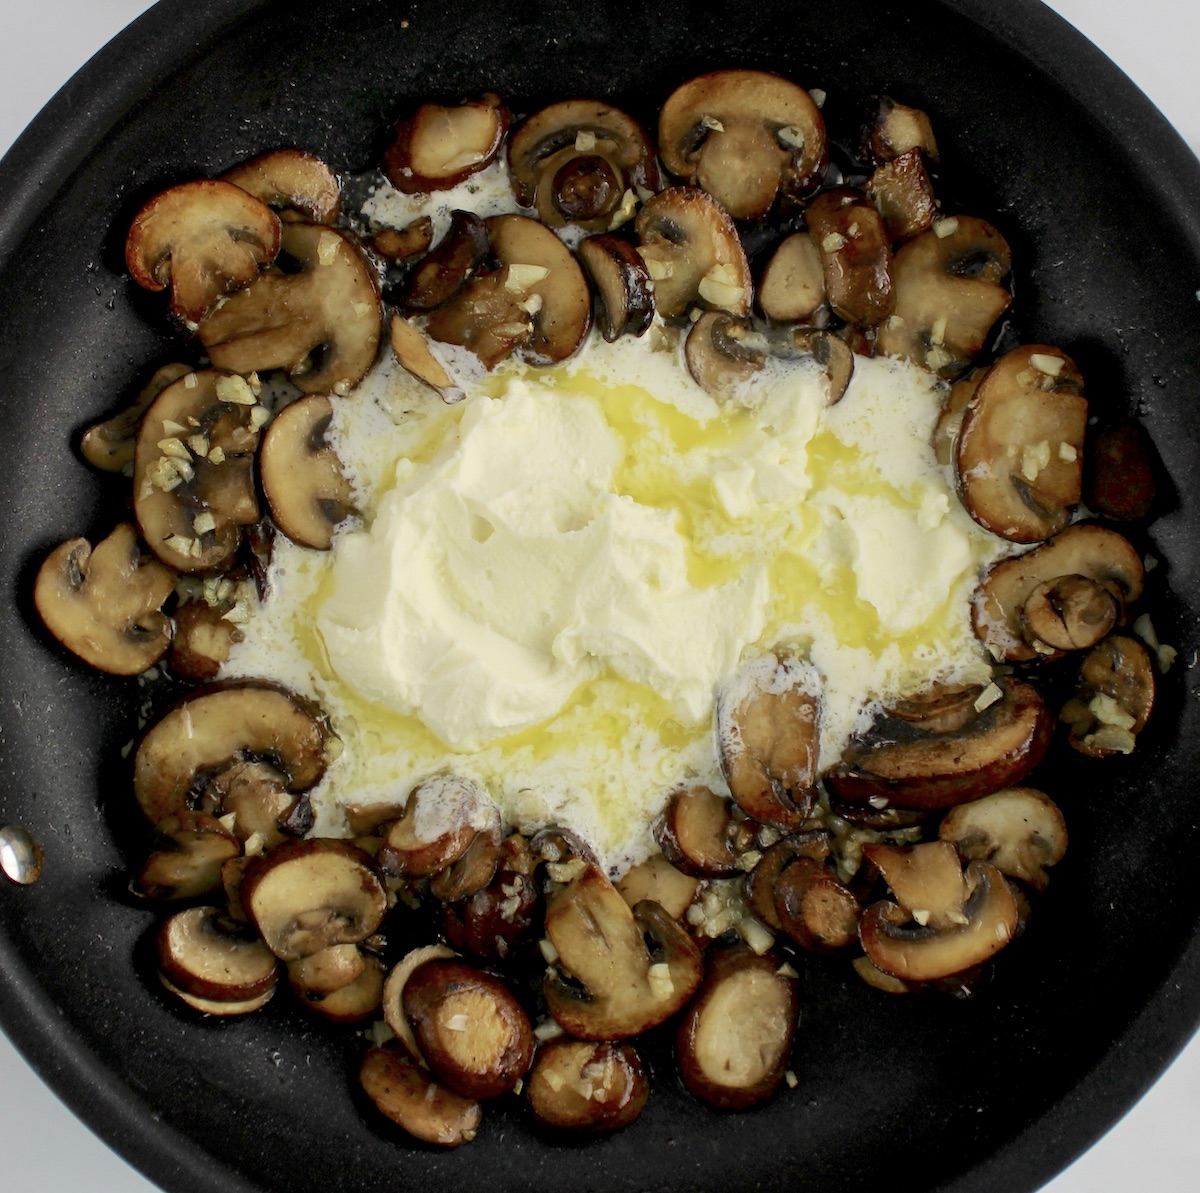 sauteed mushrooms with melted mascarpone cheese in middle of skillet